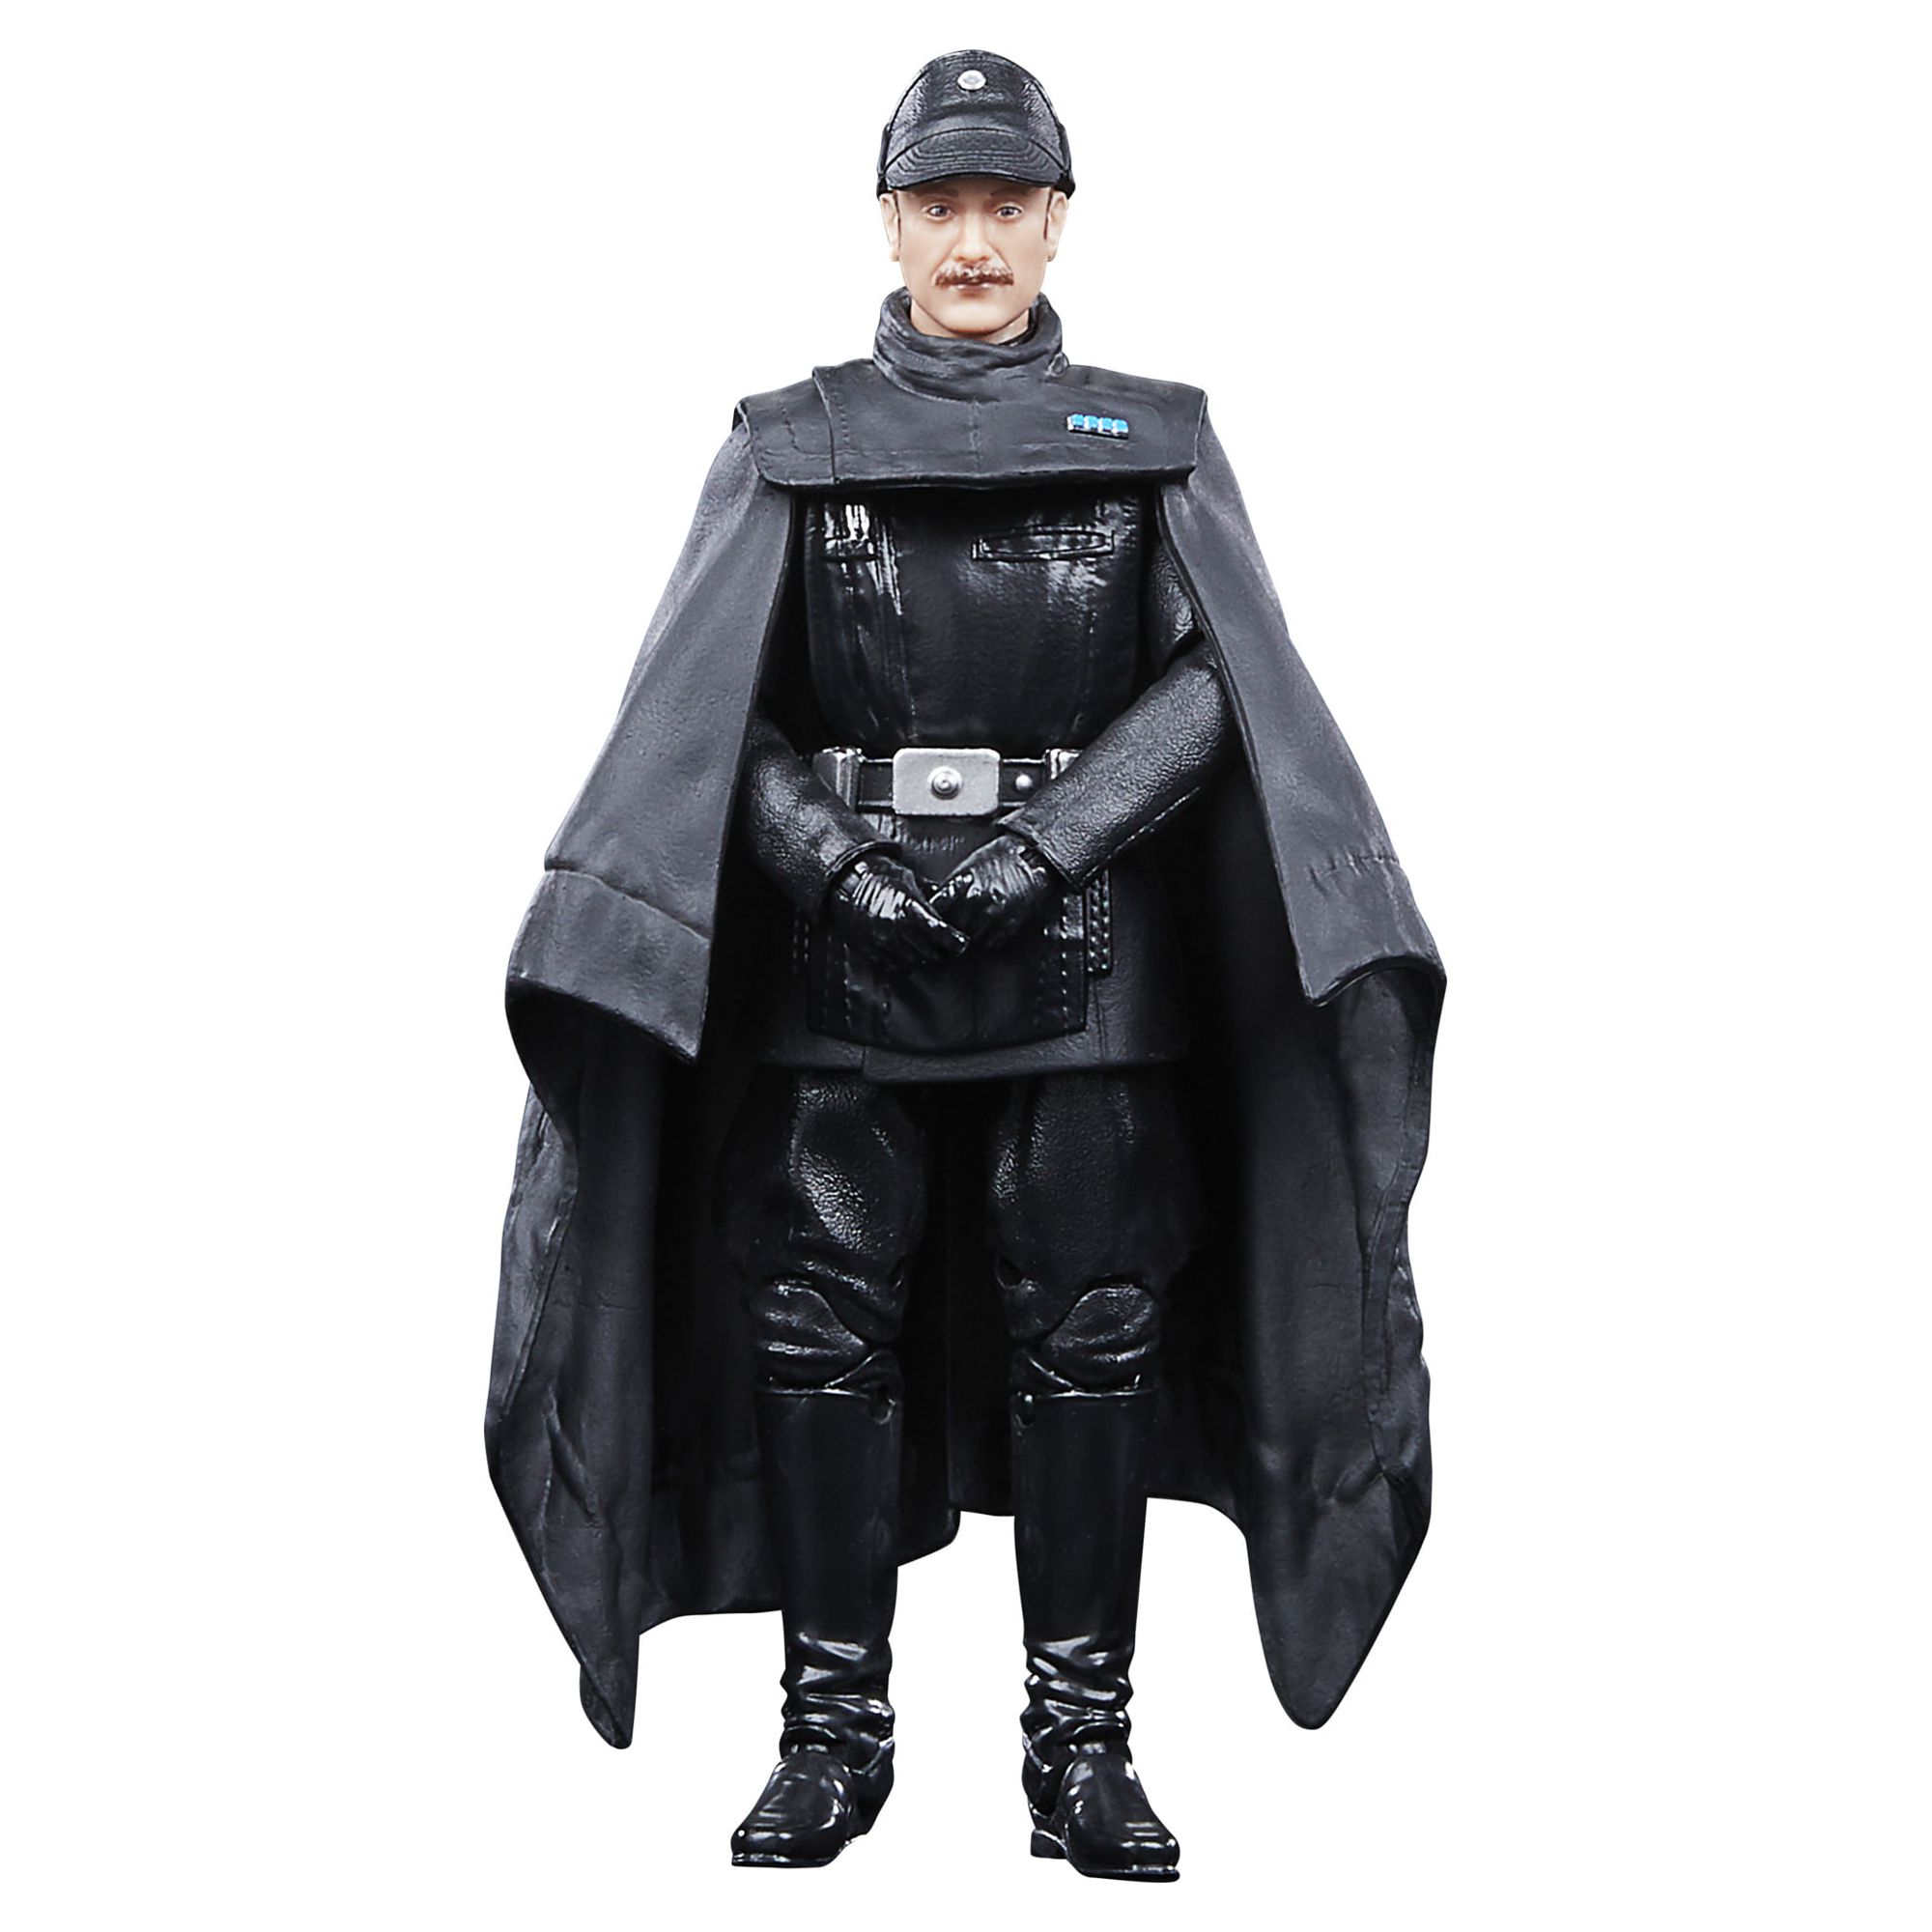 Star Wars: Black Series Imperial Officer (Dark Times) Kids Toy Action Figure for Boys and Girls Ages 4 5 6 7 8 and Up, Only At Walmart - image 5 of 12